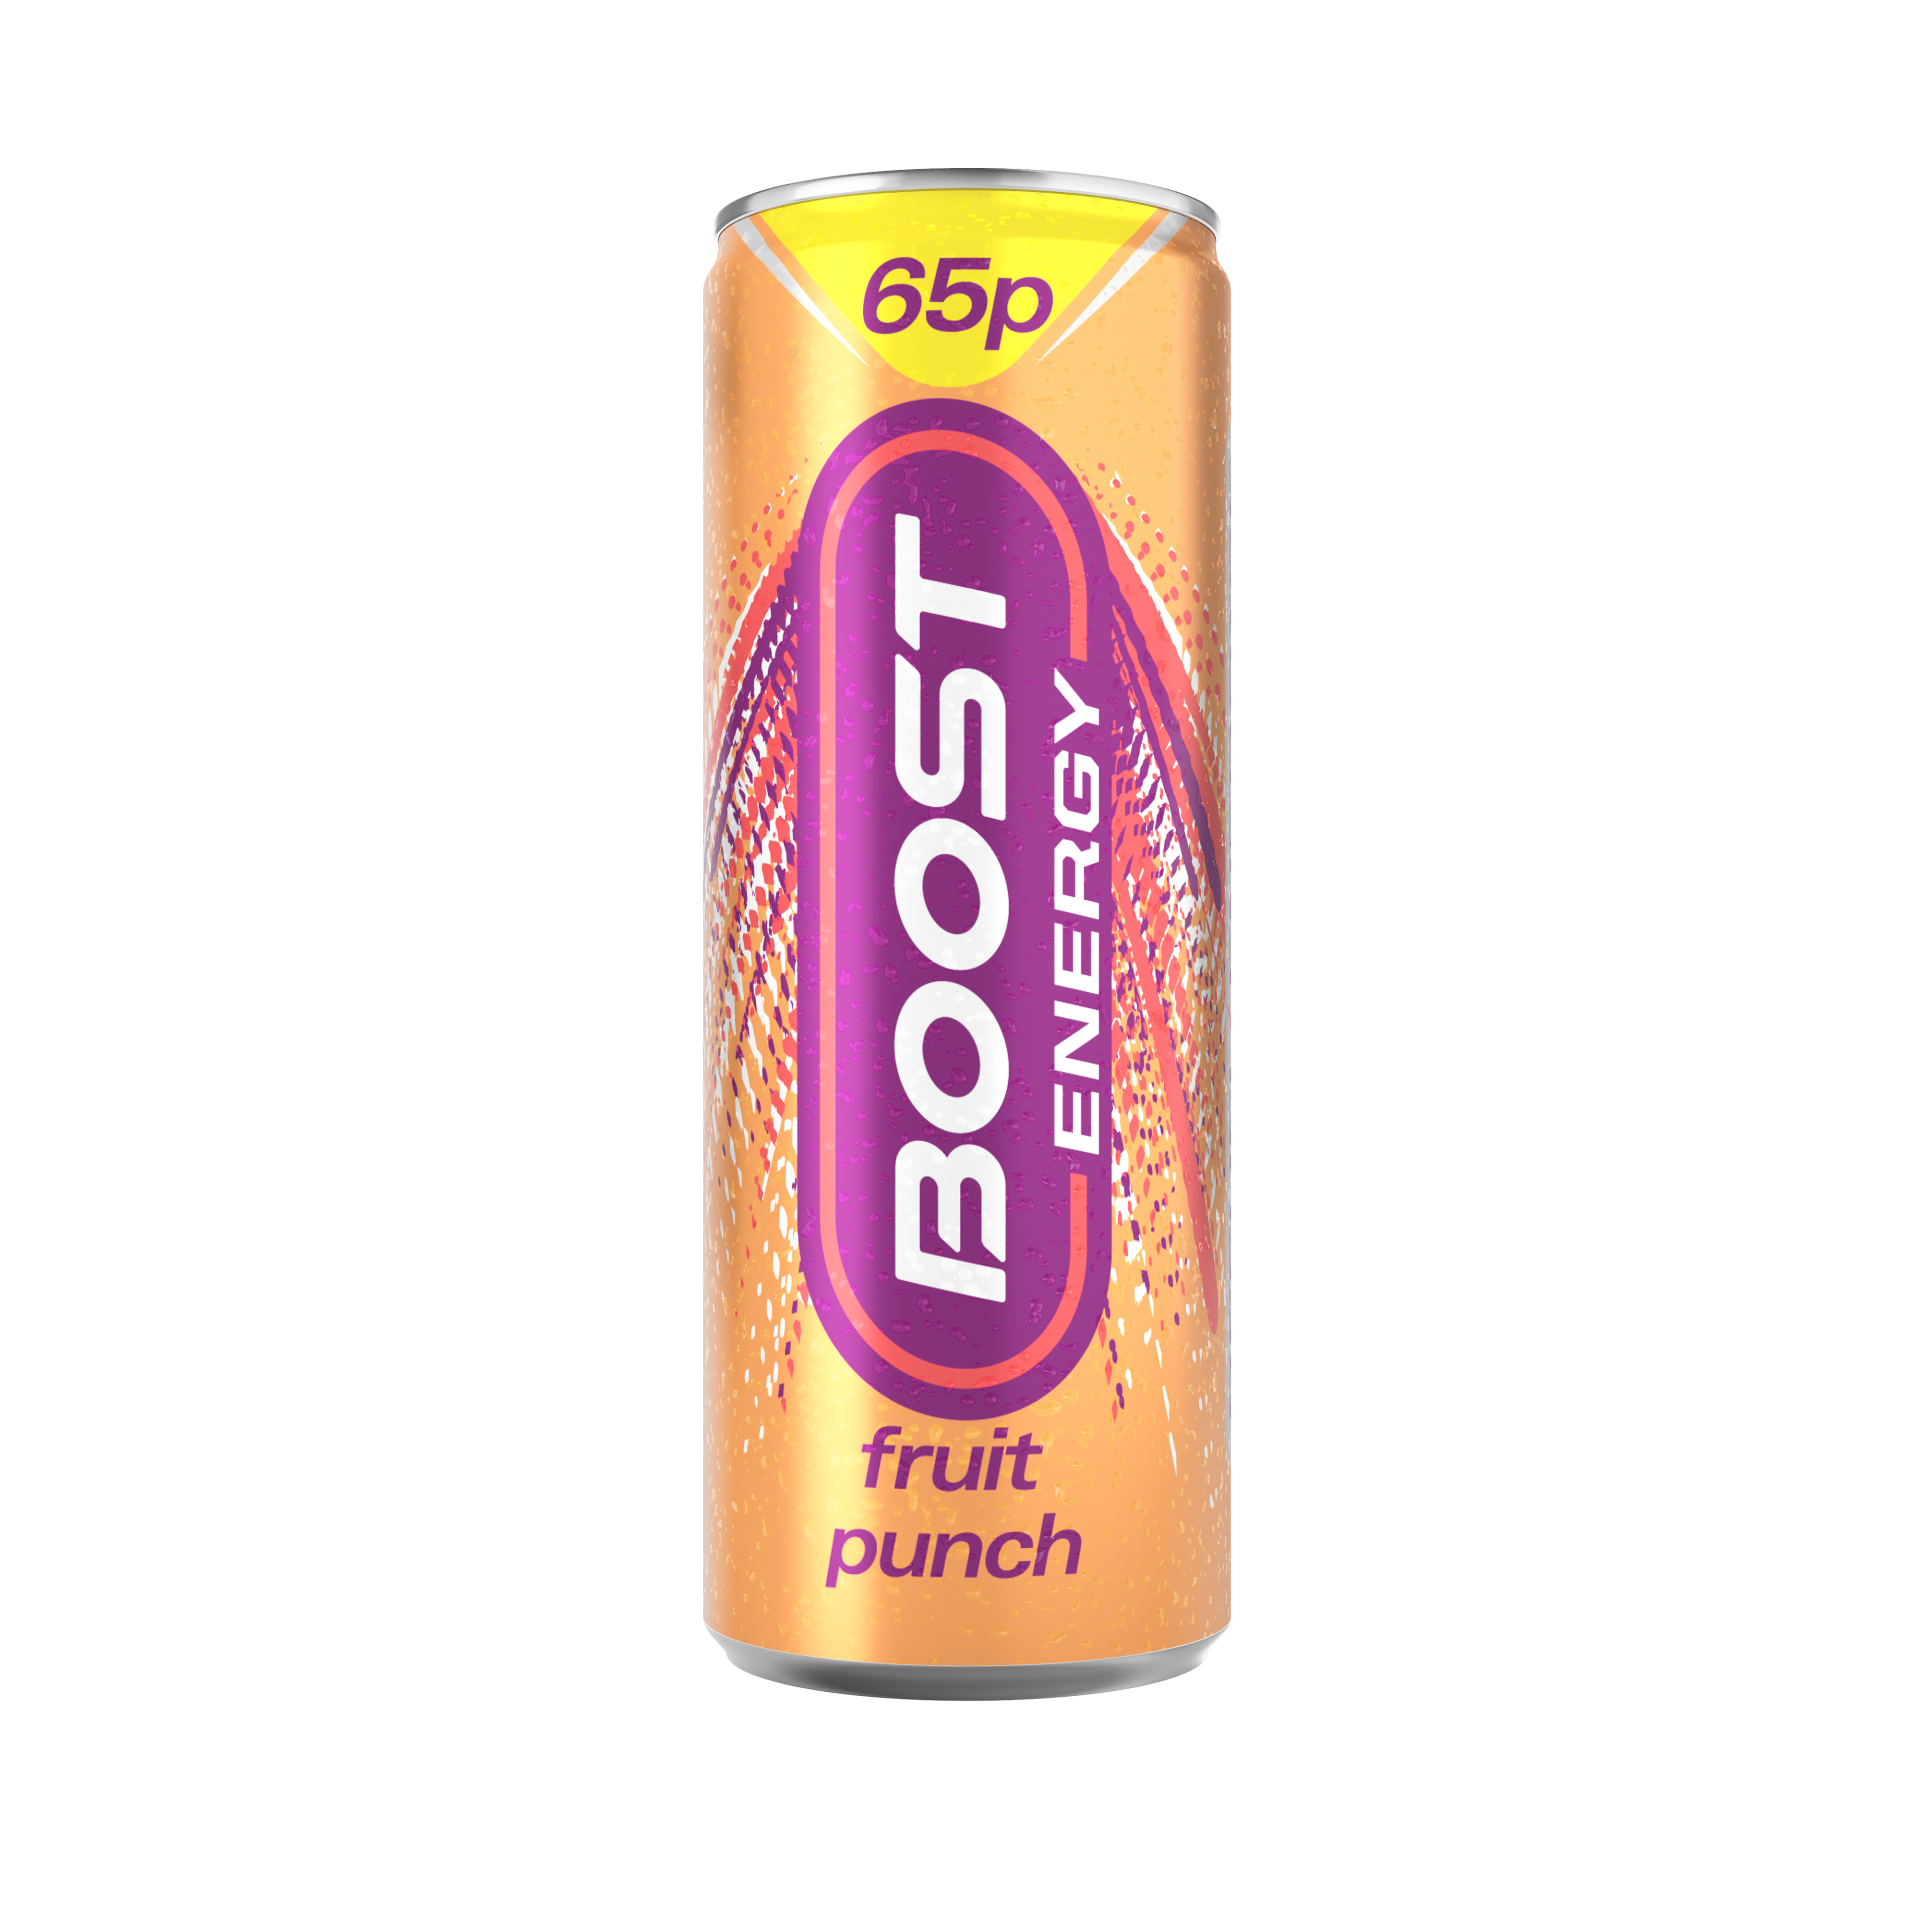 Boost revamps popular fruit punch flavour